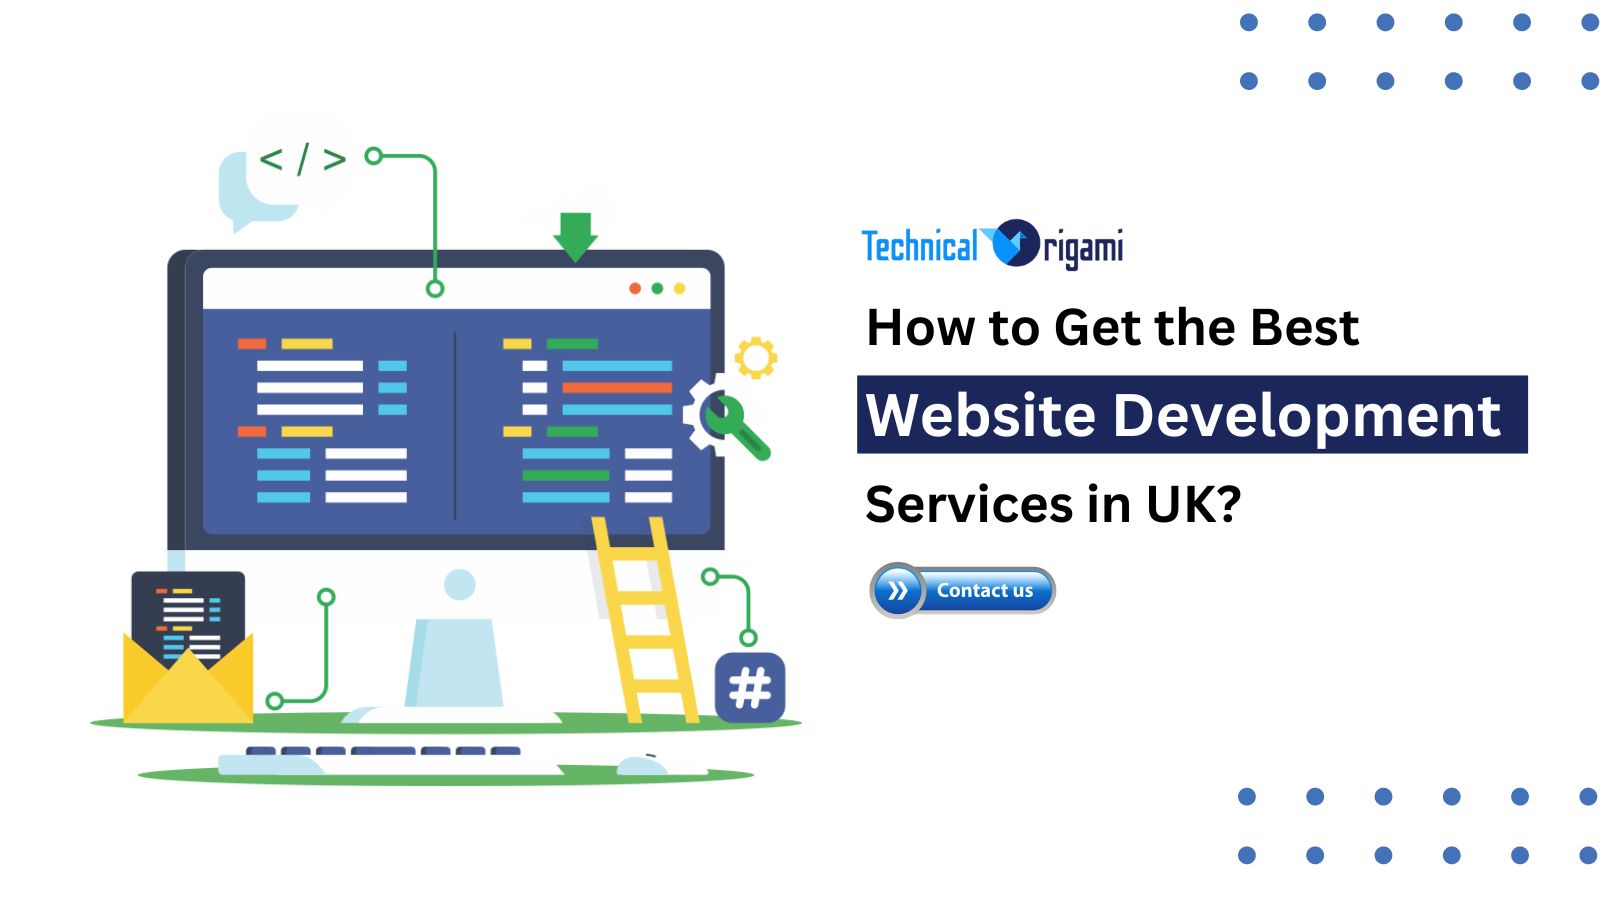 How to Get the Best Website Development Services in UK?